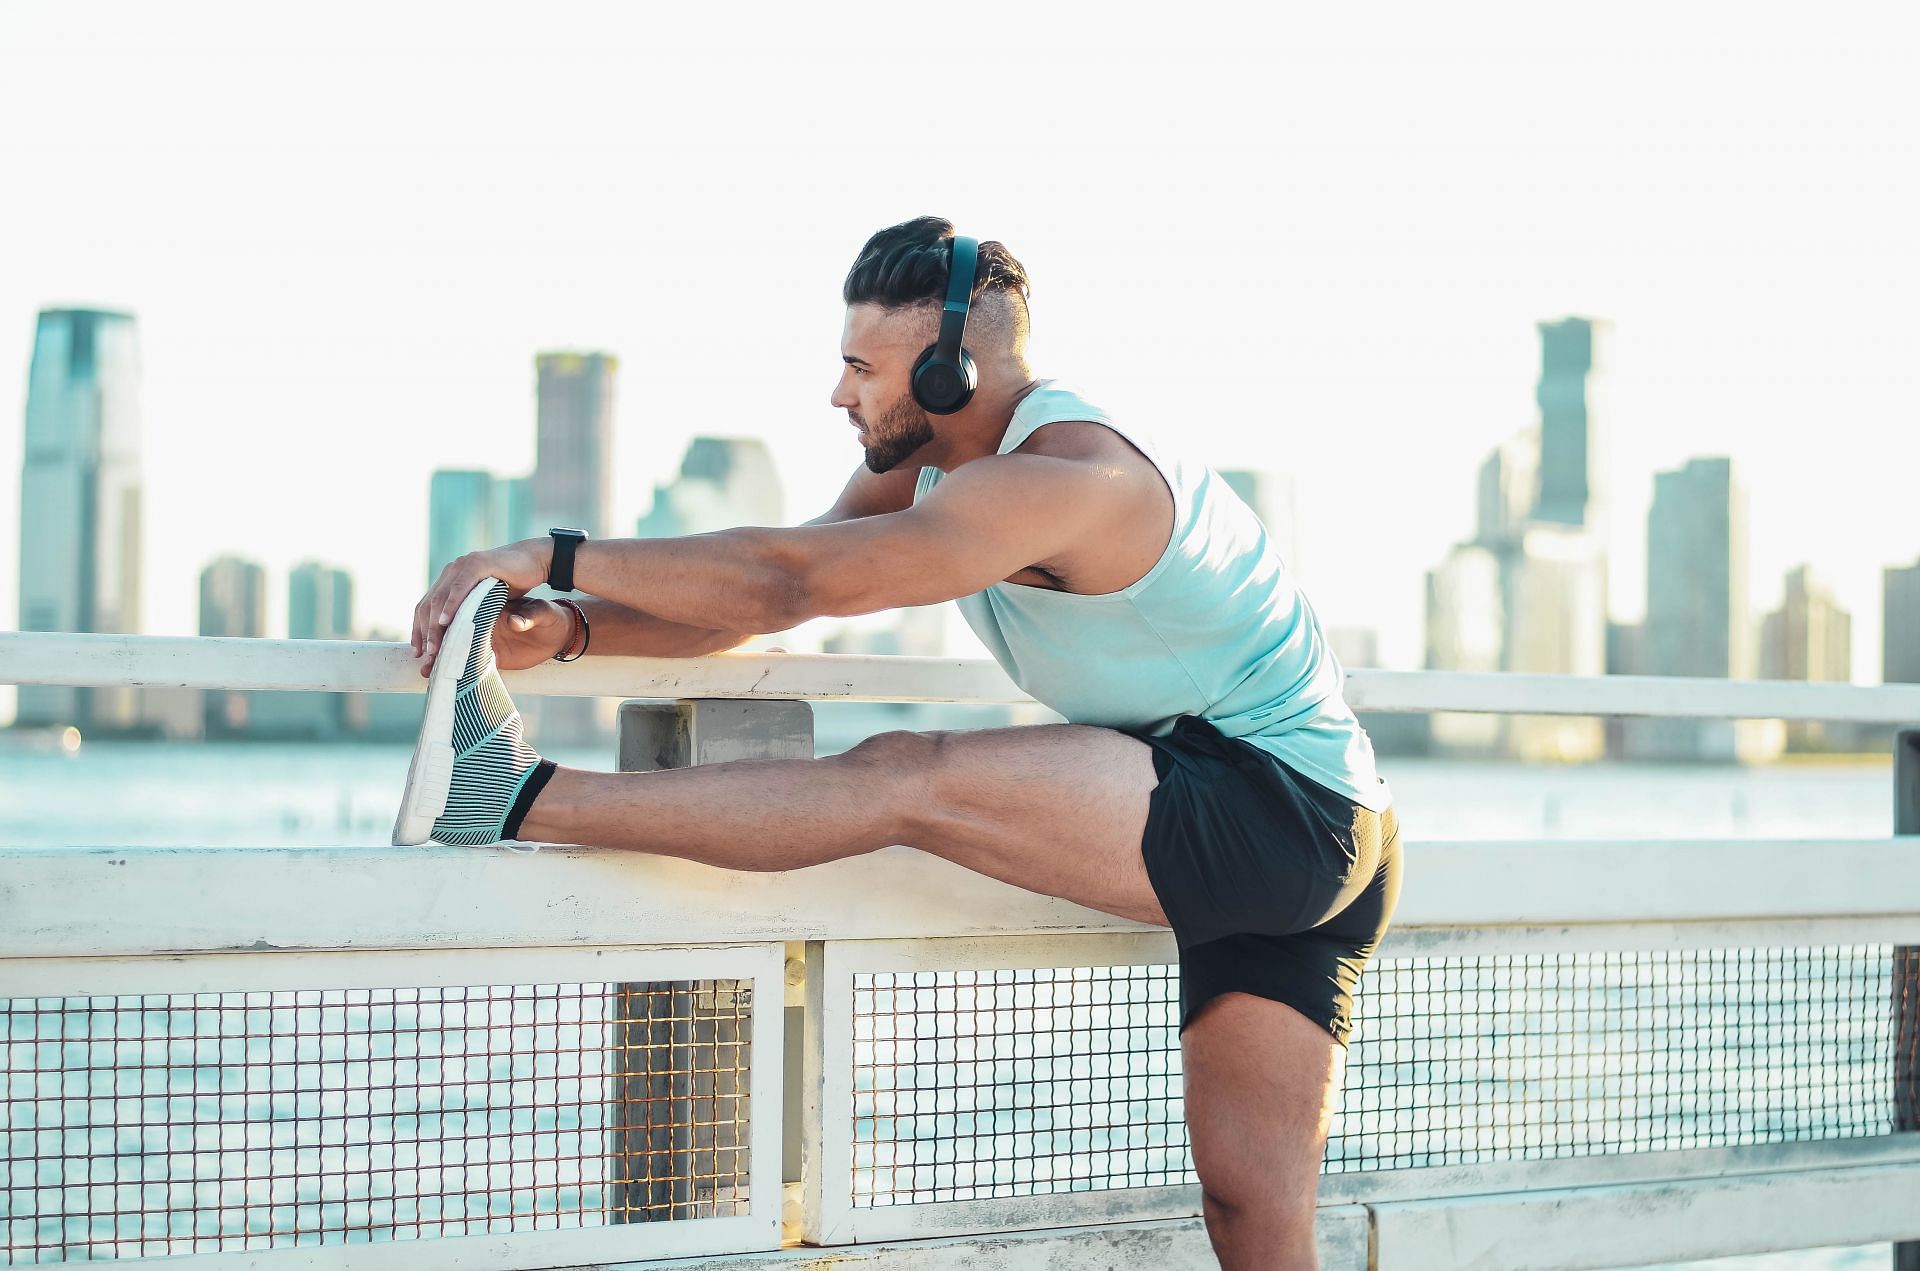 You can perform stretching after workout, before bedtime or before starting your workout session. (Image via Unsplash/Michael Demoya)